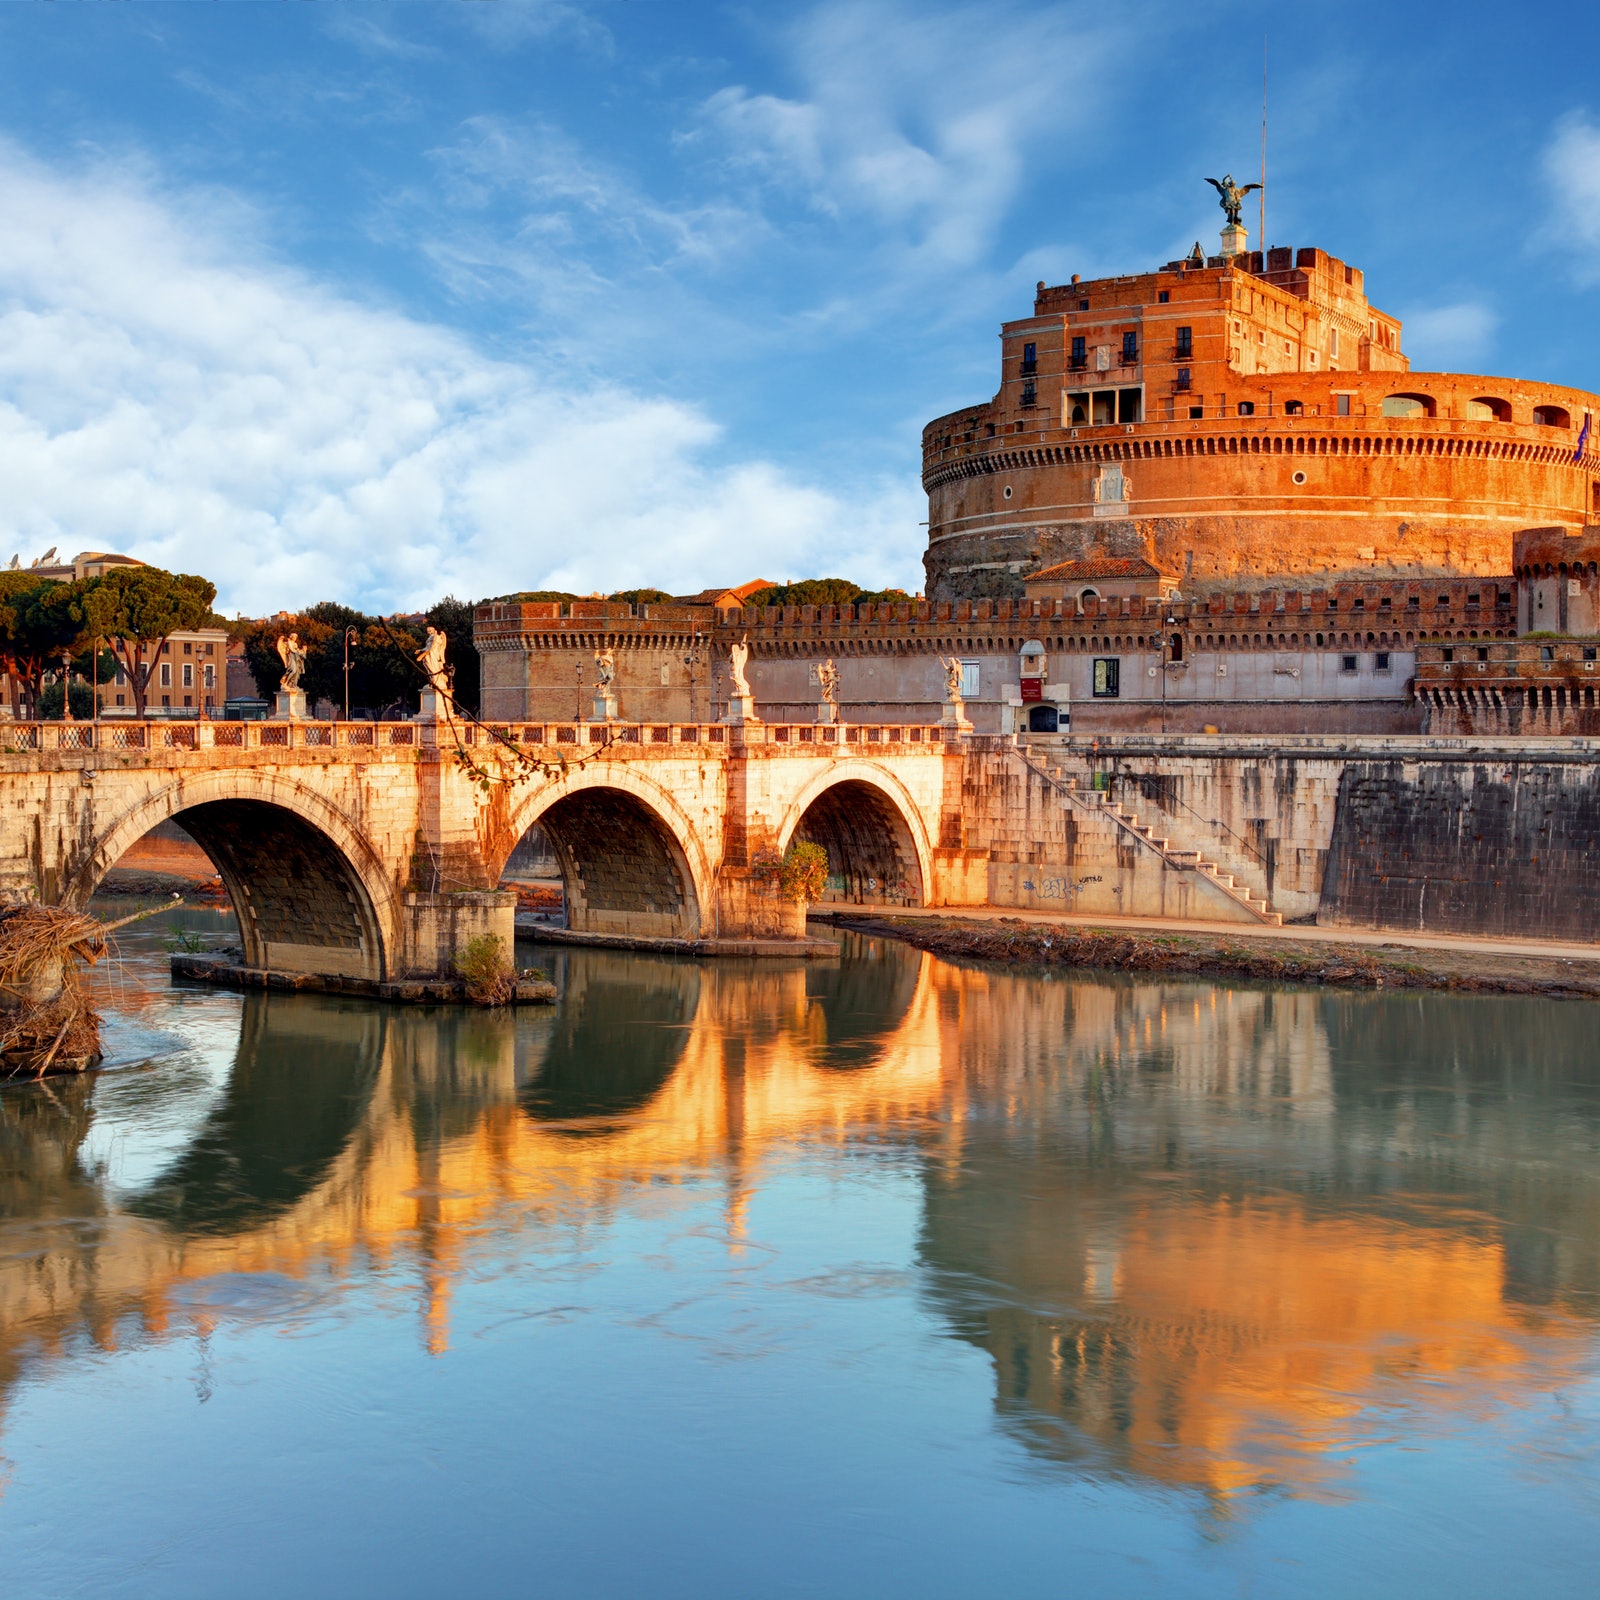 Castel Sant'Angelo in Italy